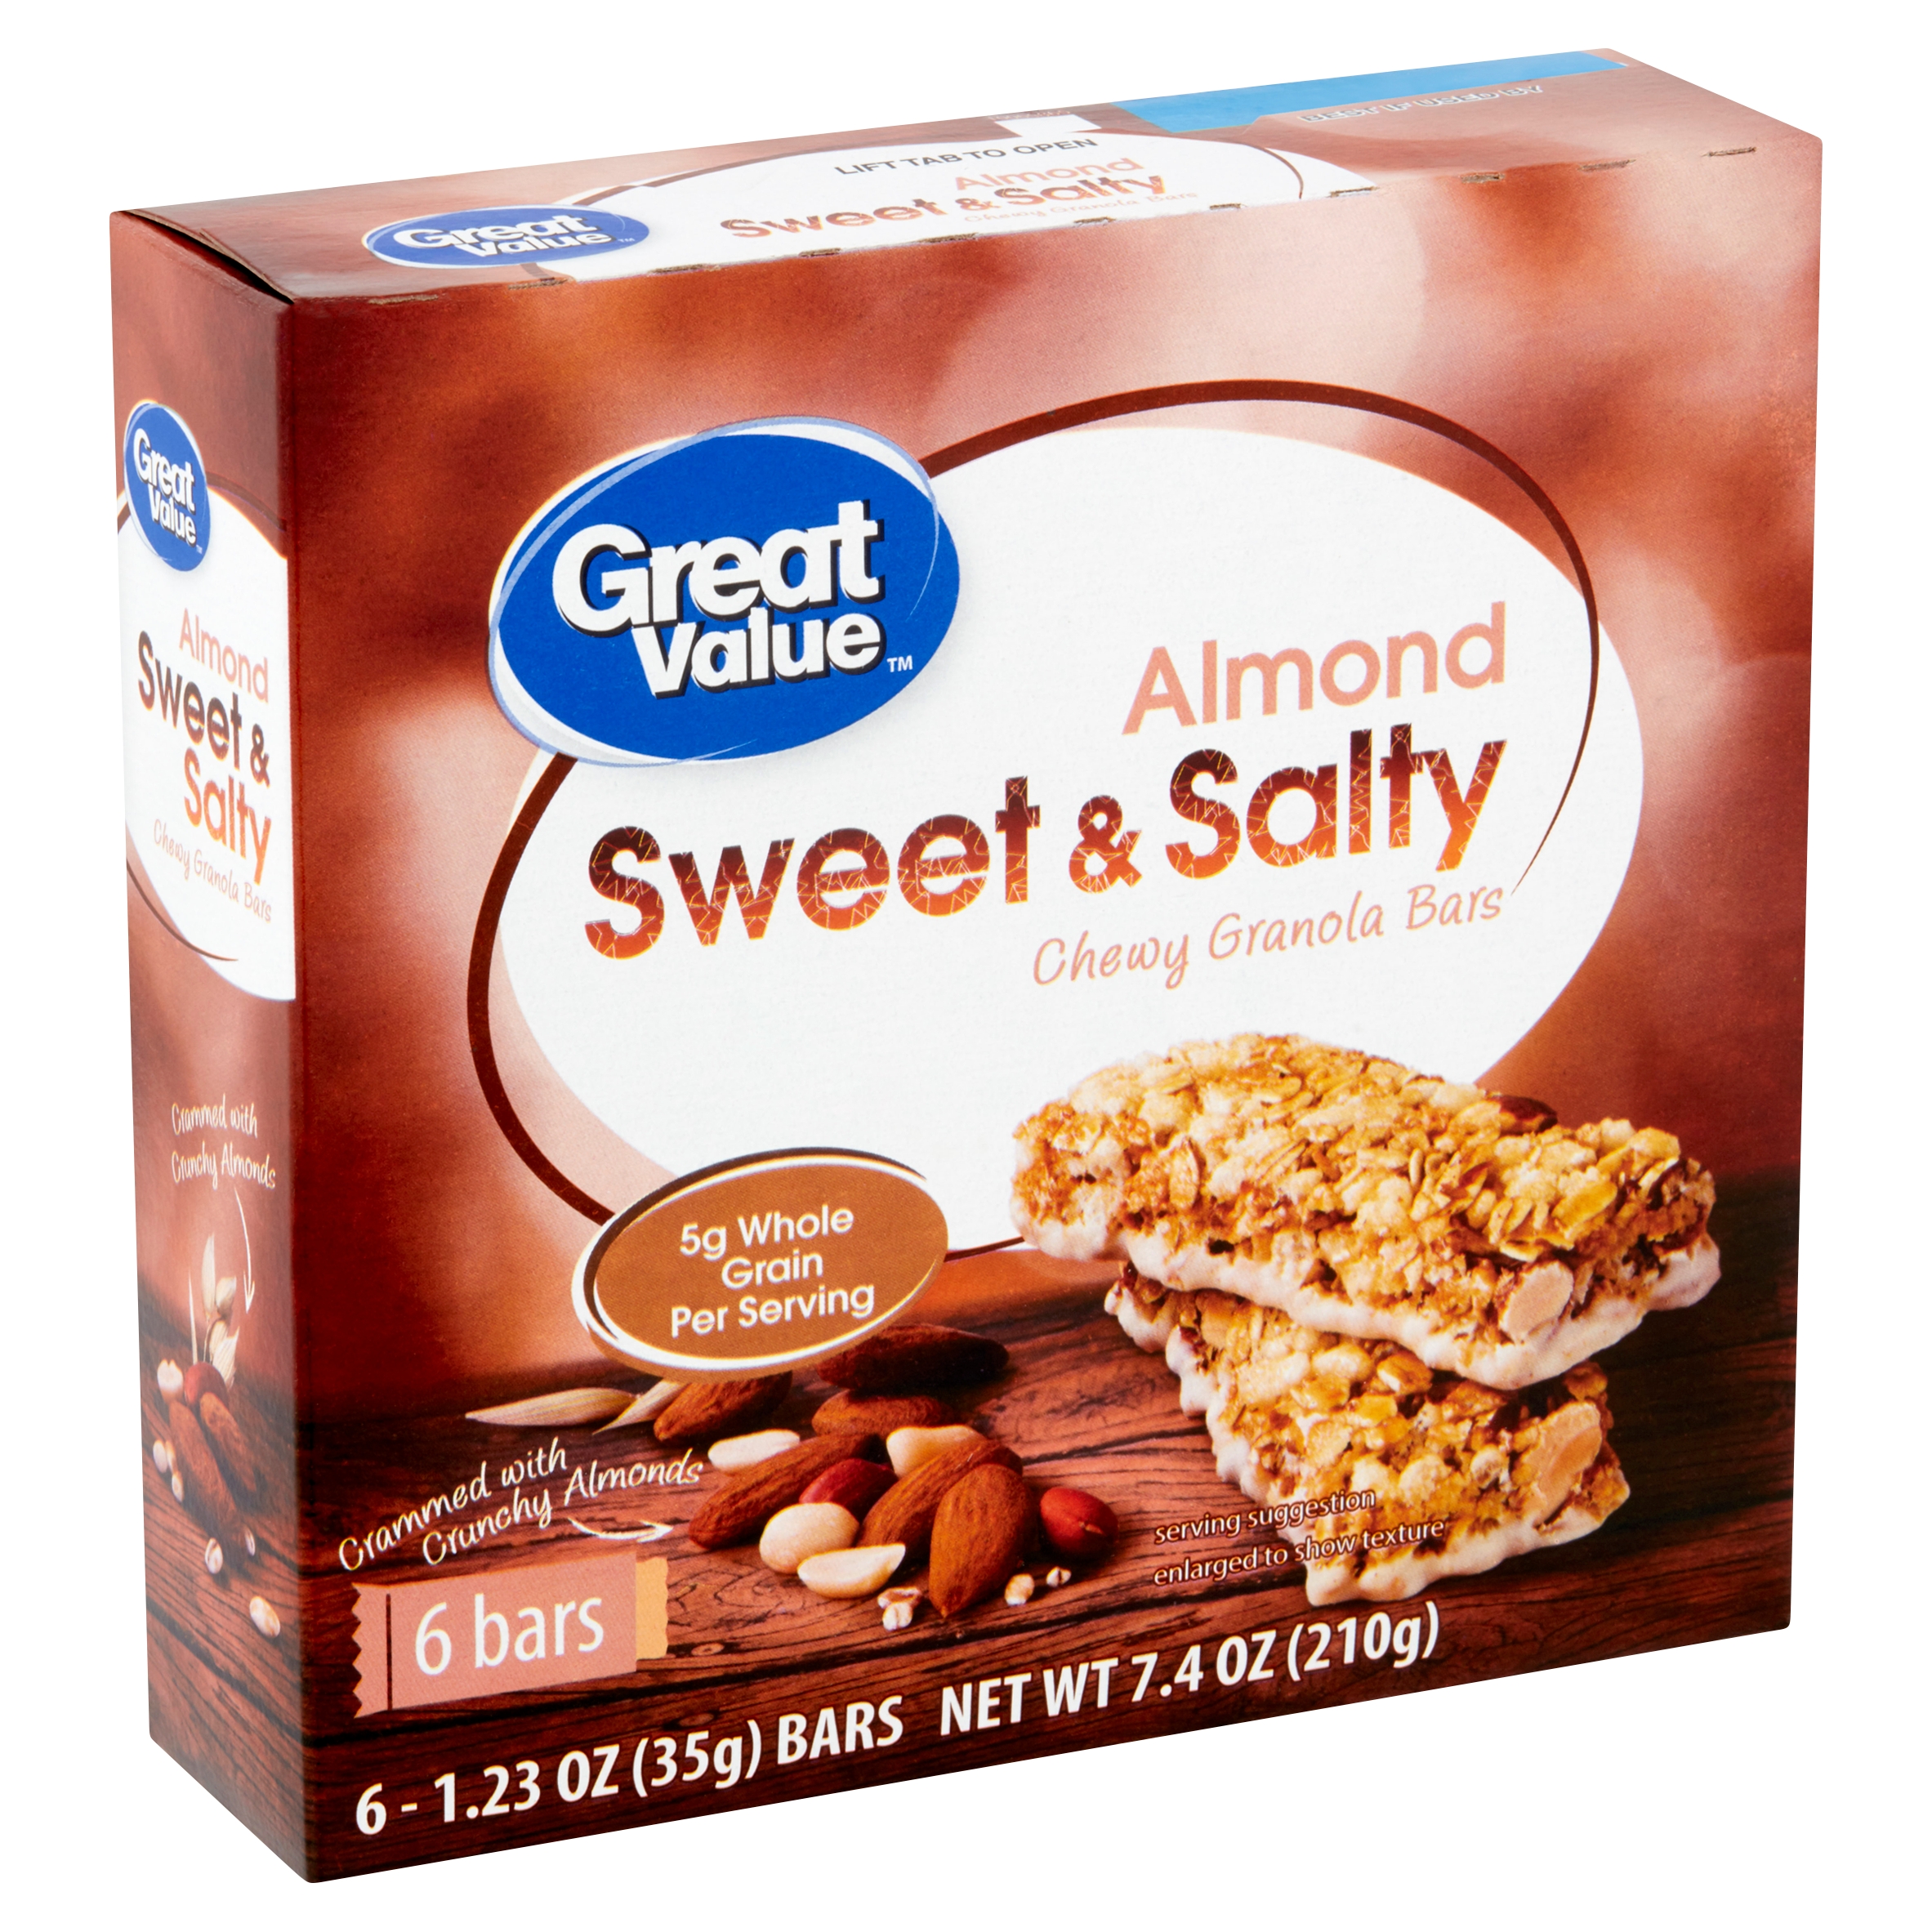 Great Value Almond Sweet & Salty Chewy Granola Bars 1.23 Oz 6 Count Image